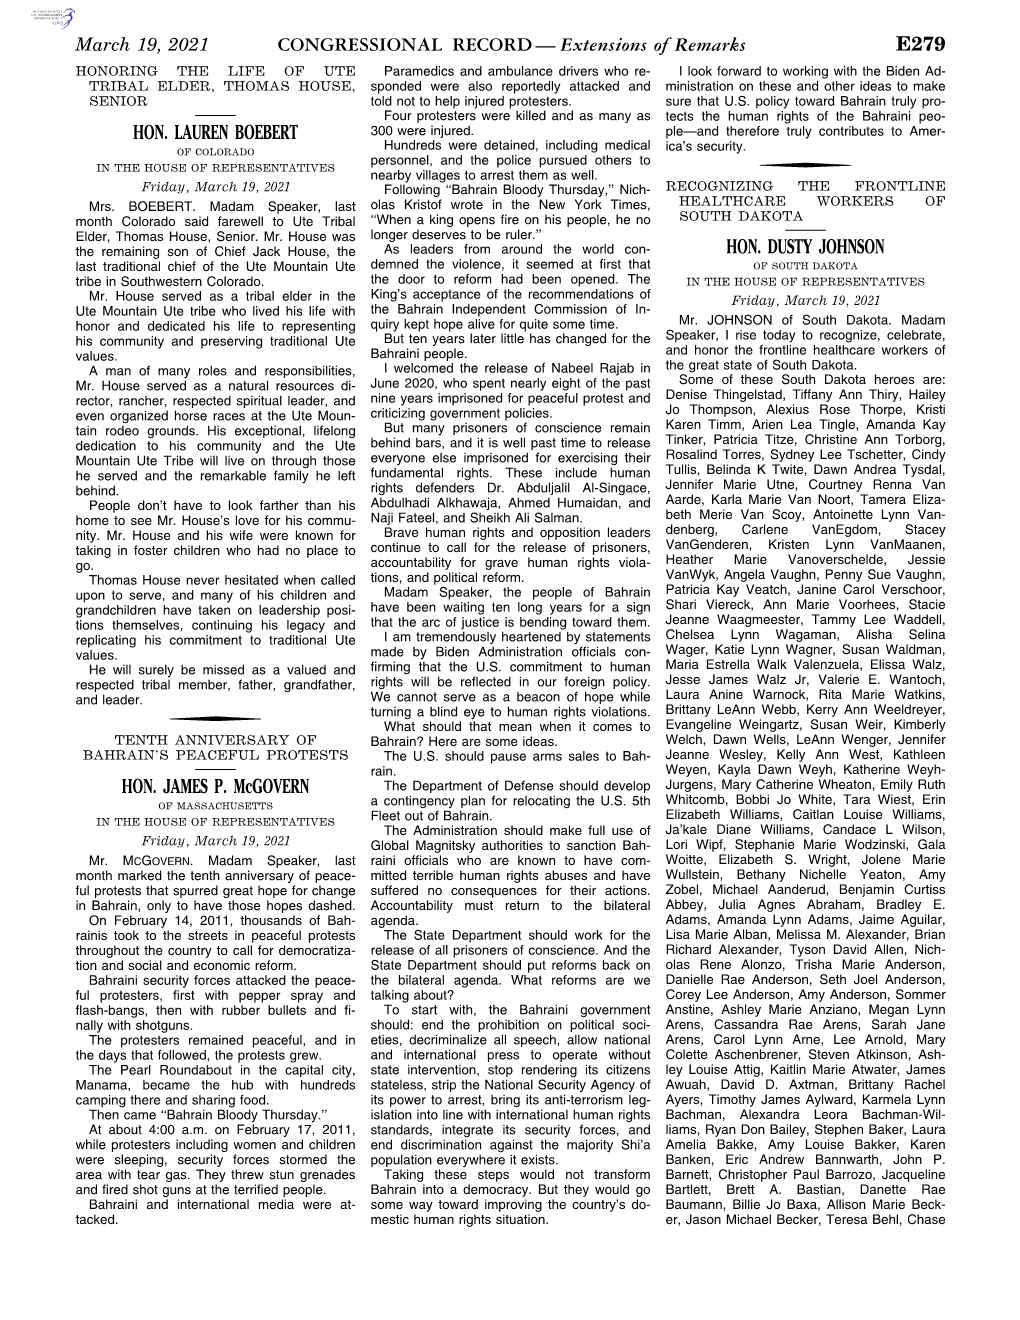 CONGRESSIONAL RECORD— Extensions of Remarks E279 HON